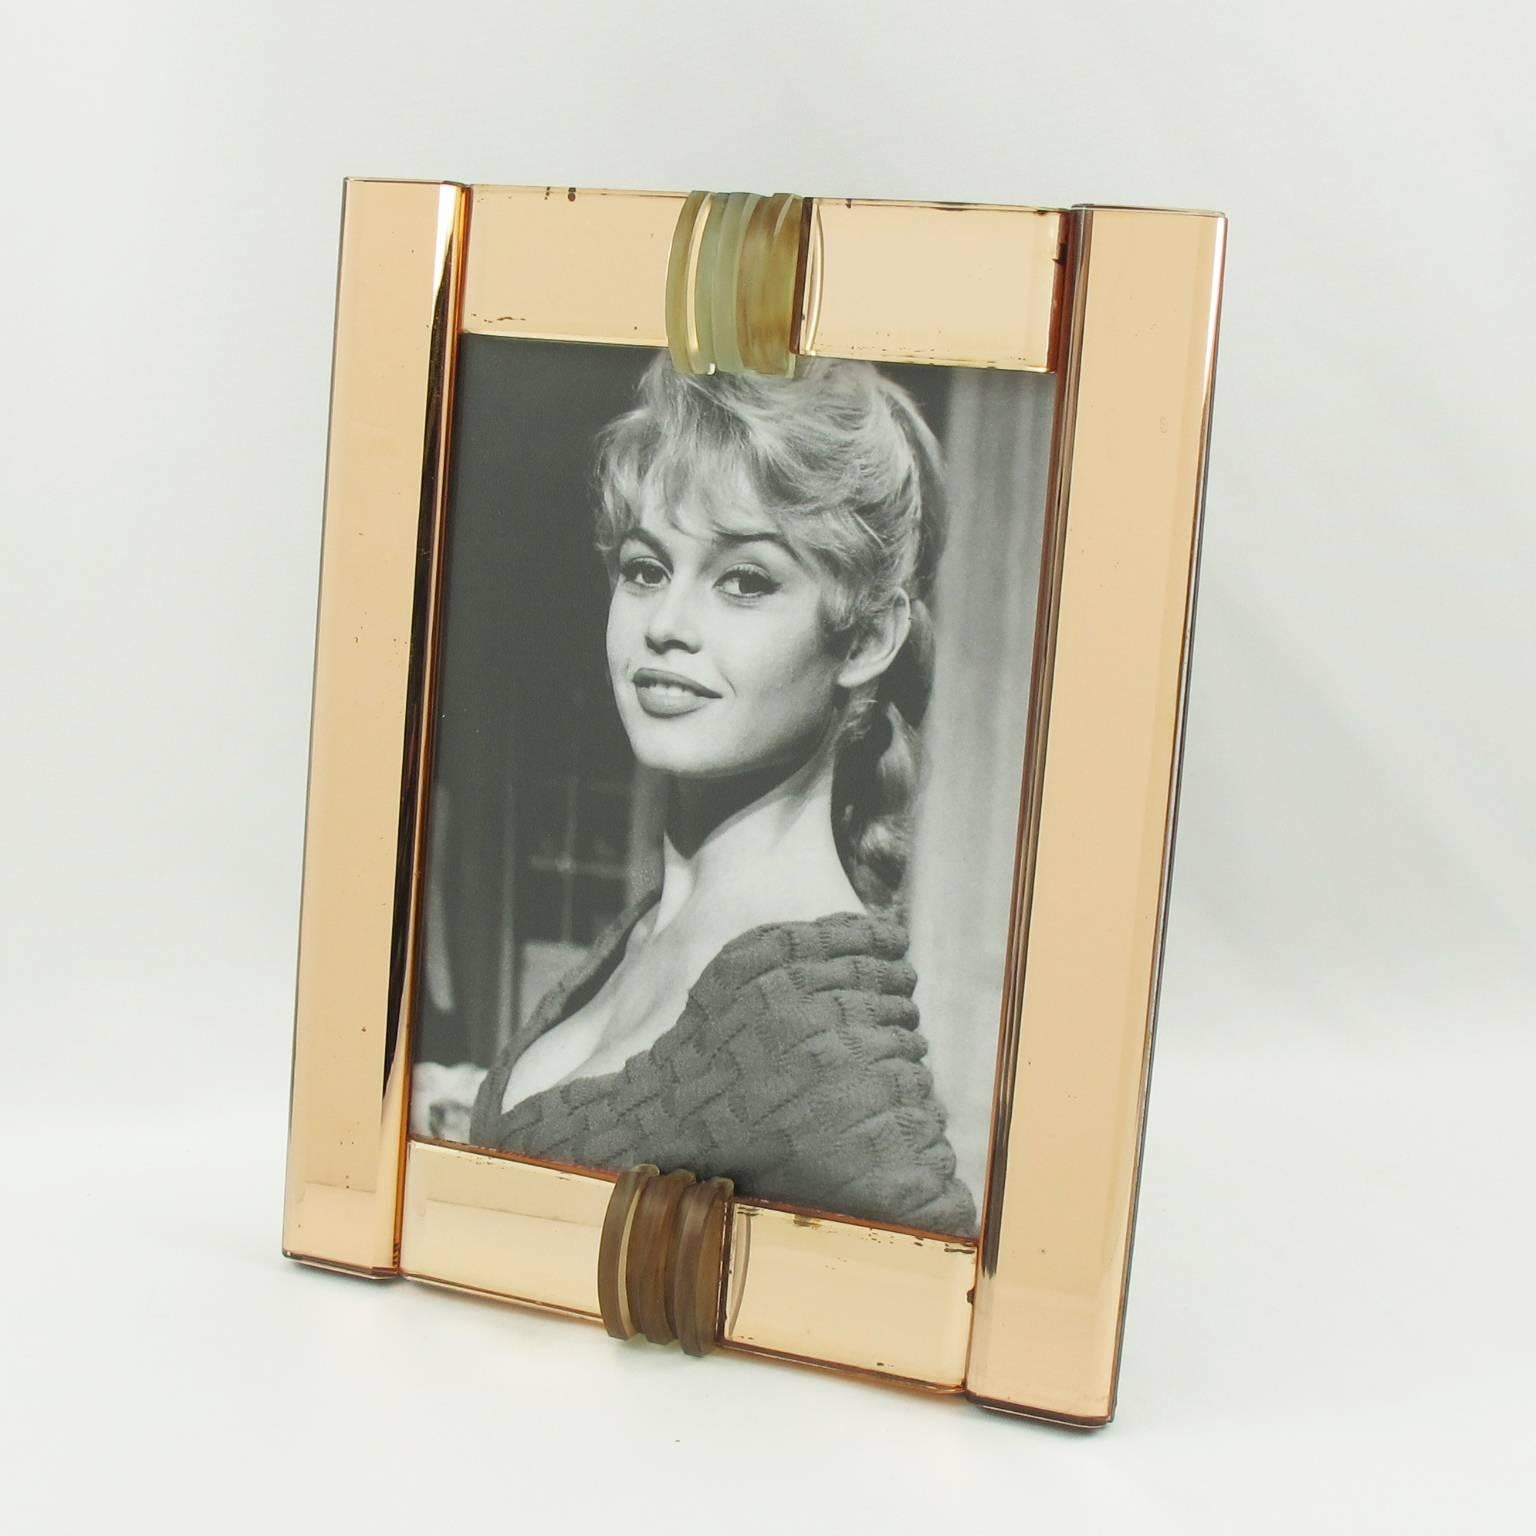 Elegant 1940s French mirrored glass picture photo frame. Deep geometric bevelling and domed sides in lovely copper or pink peach color, compliment with frosted clear glass sliced cabochons. Frame can be placed only in portrait position. Back and